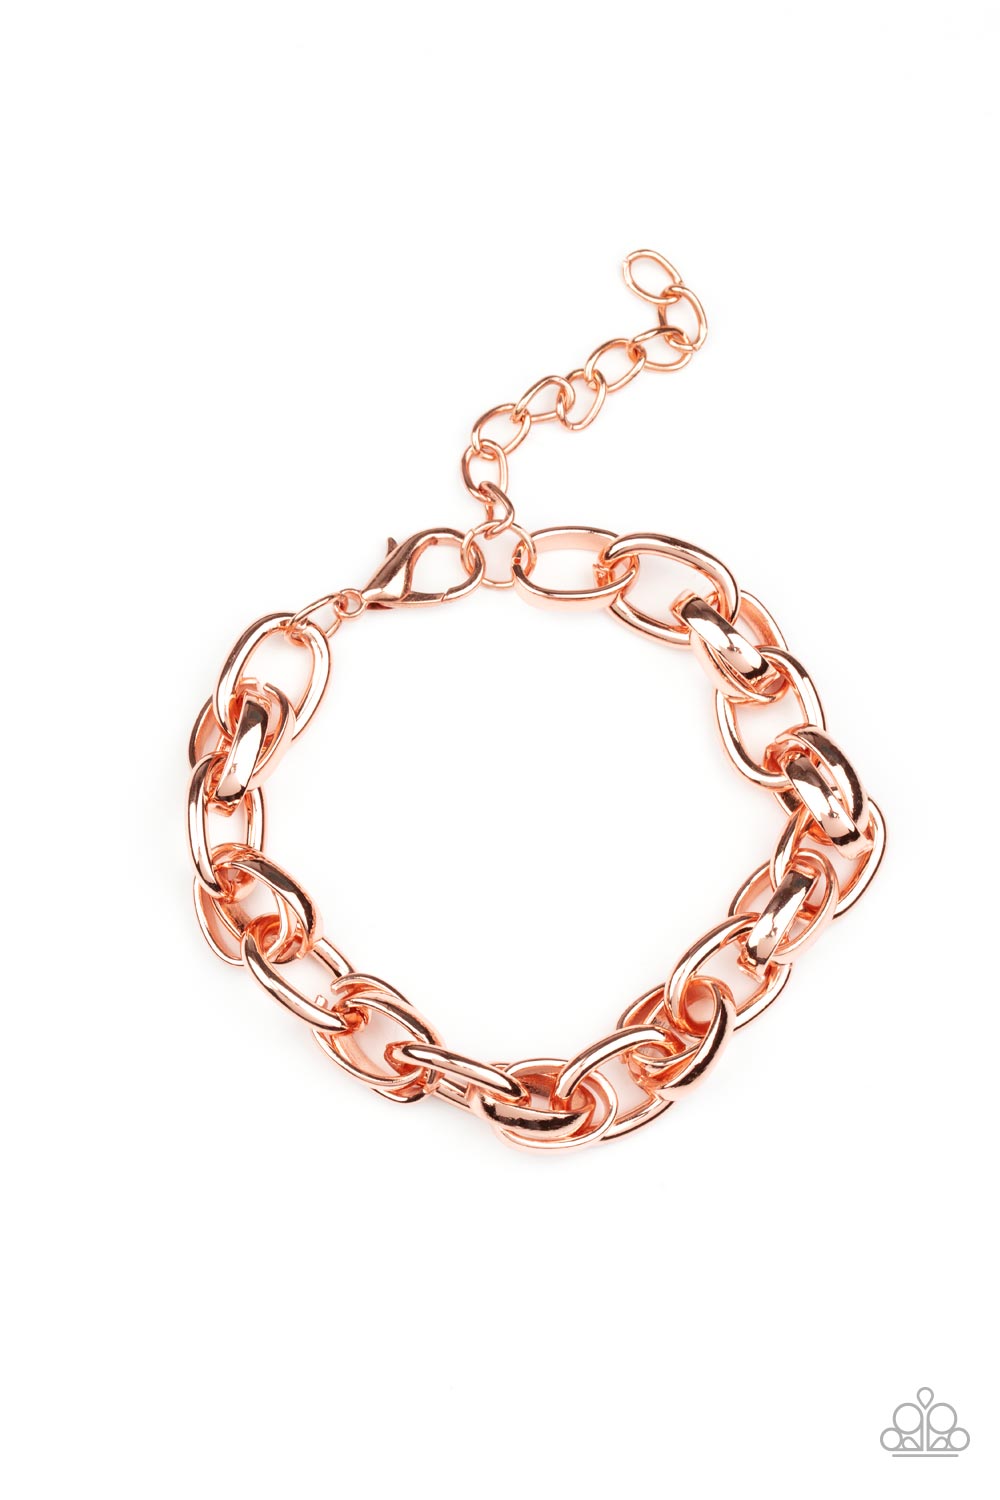 Rookie Roulette - Copper Link Bracelets  a chunky collection of bold shiny copper links interlock around the wrist, creating an intense industrial centerpiece. Features an adjustable clasp closure.  Sold as one individual bracelet.